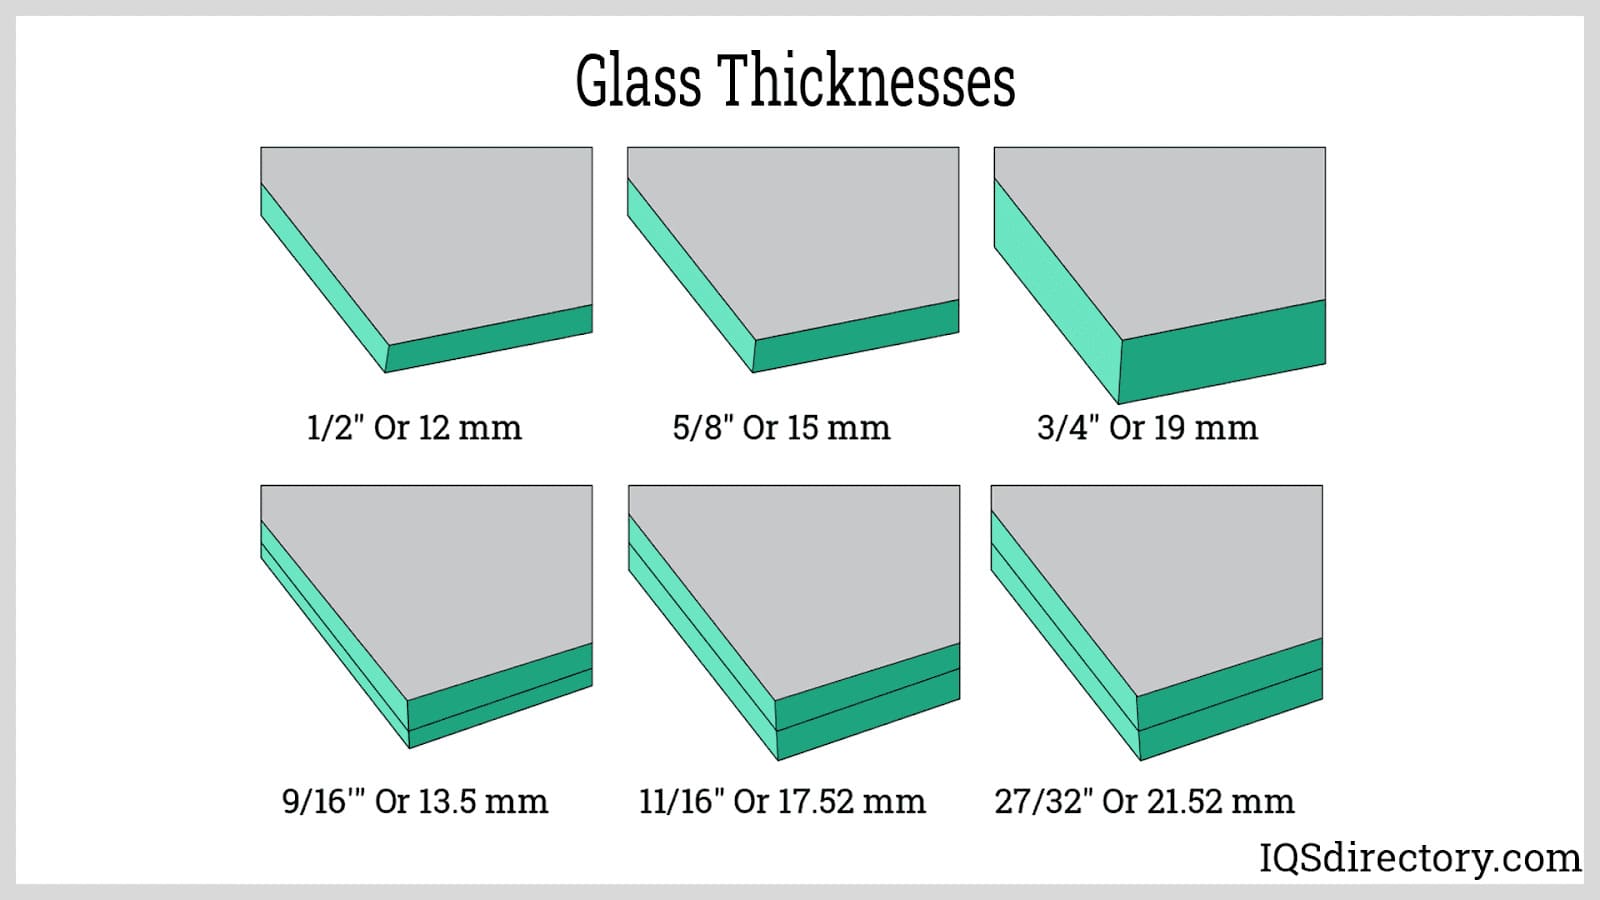 Glass Thicknesses